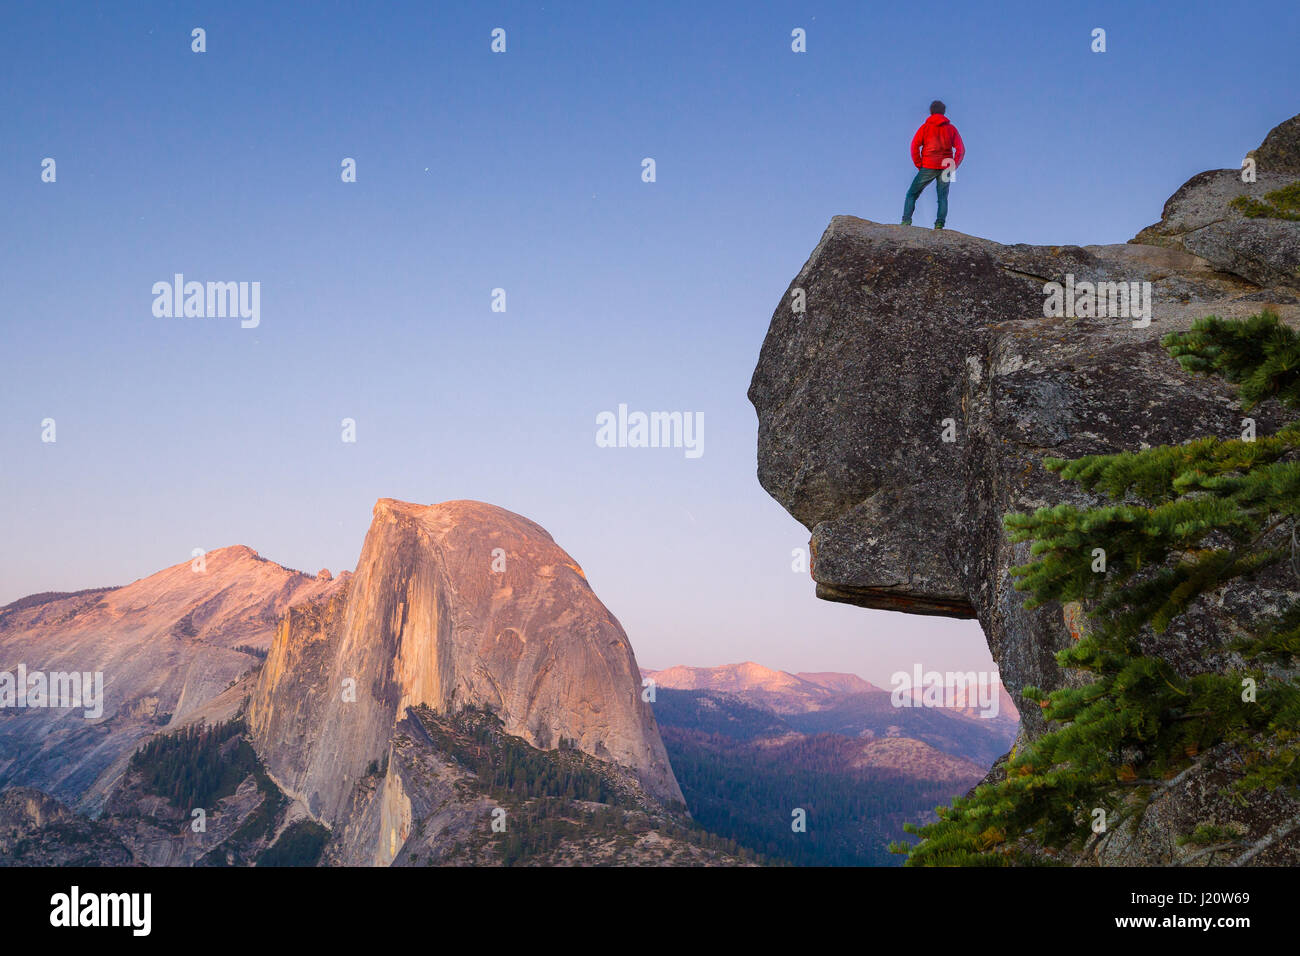 A fearless hiker is standing on an overhanging rock enjoying the view towards famous Half Dome at Glacier Point overlook at sunset, Yosemite NP, USA Stock Photo